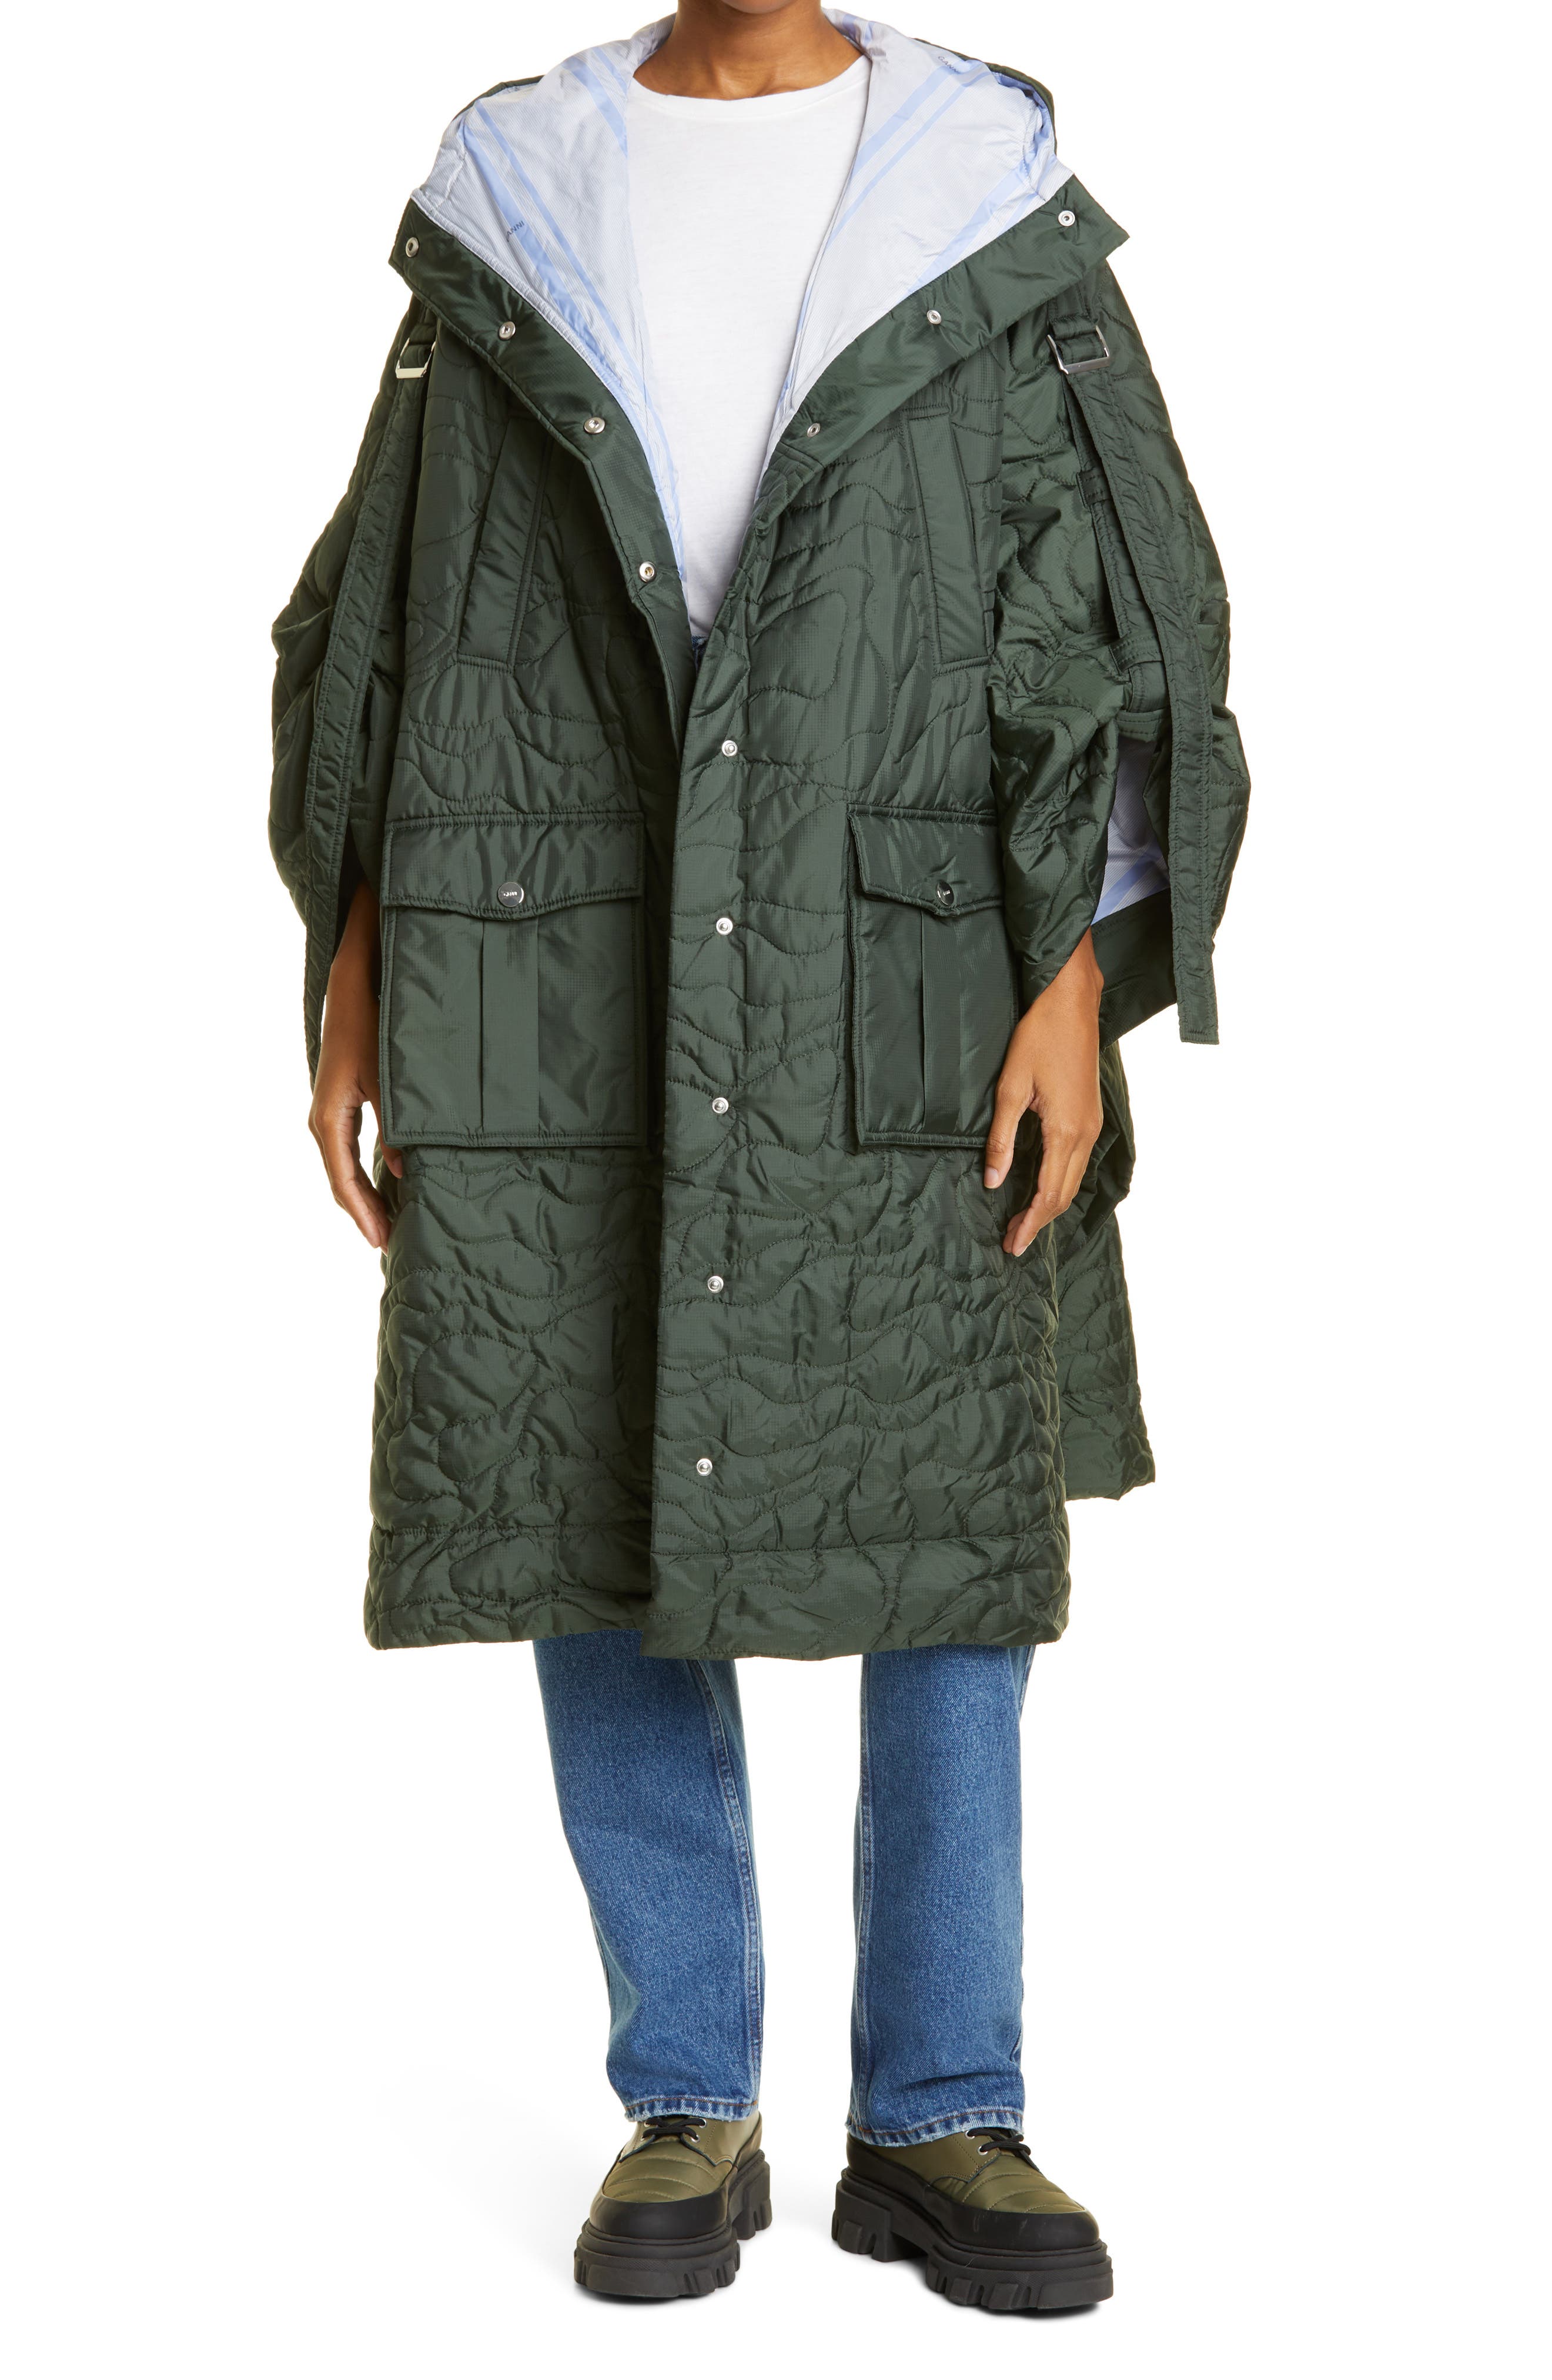 Ganni Quilted Recycled Polyester Cape Coat in Dark Green at Nordstrom, Size Small